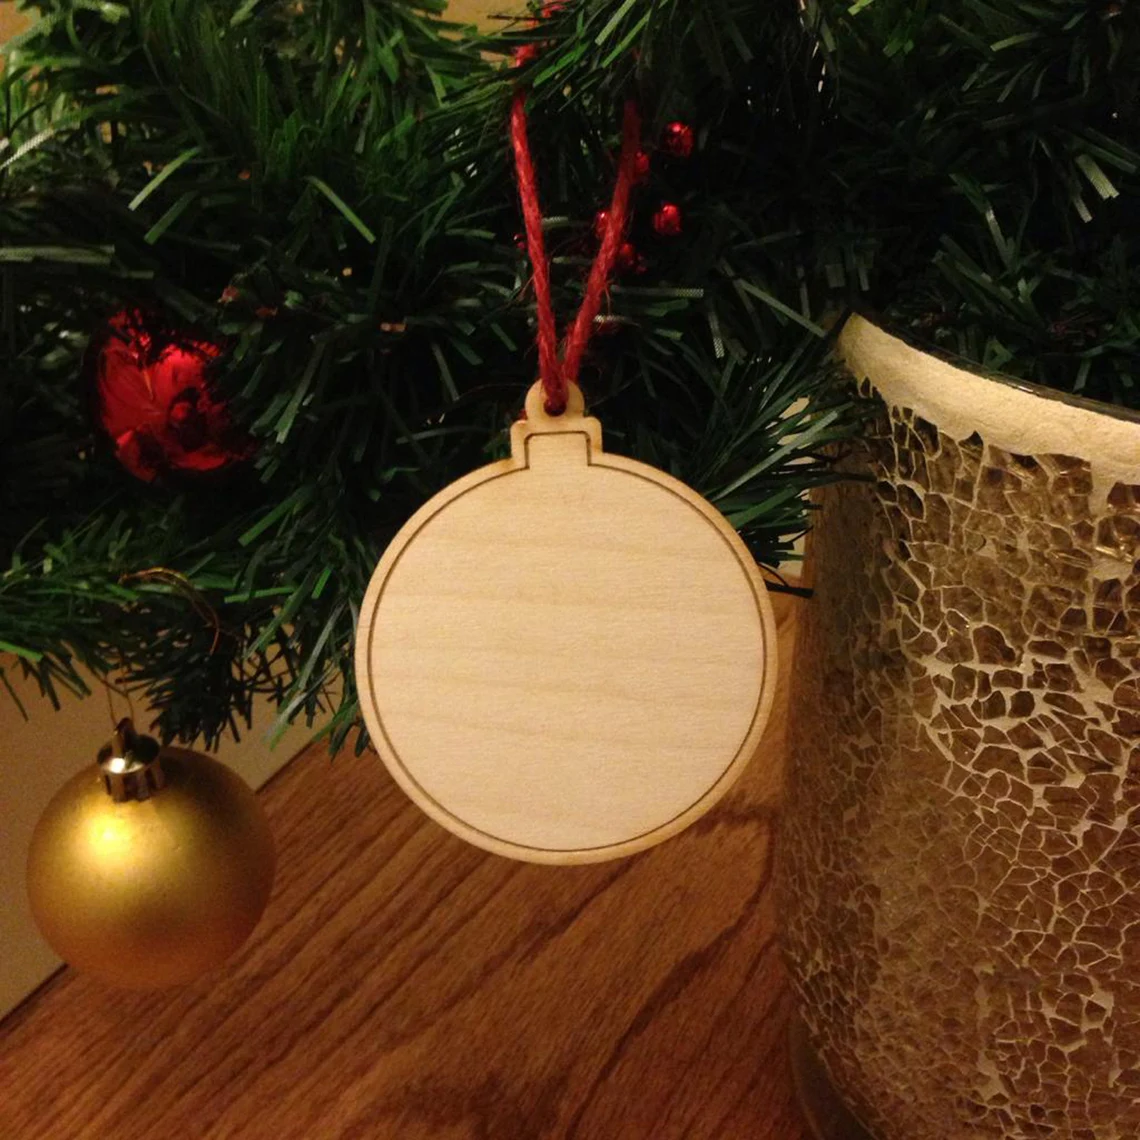 Set of Wooden Christmas Baubles